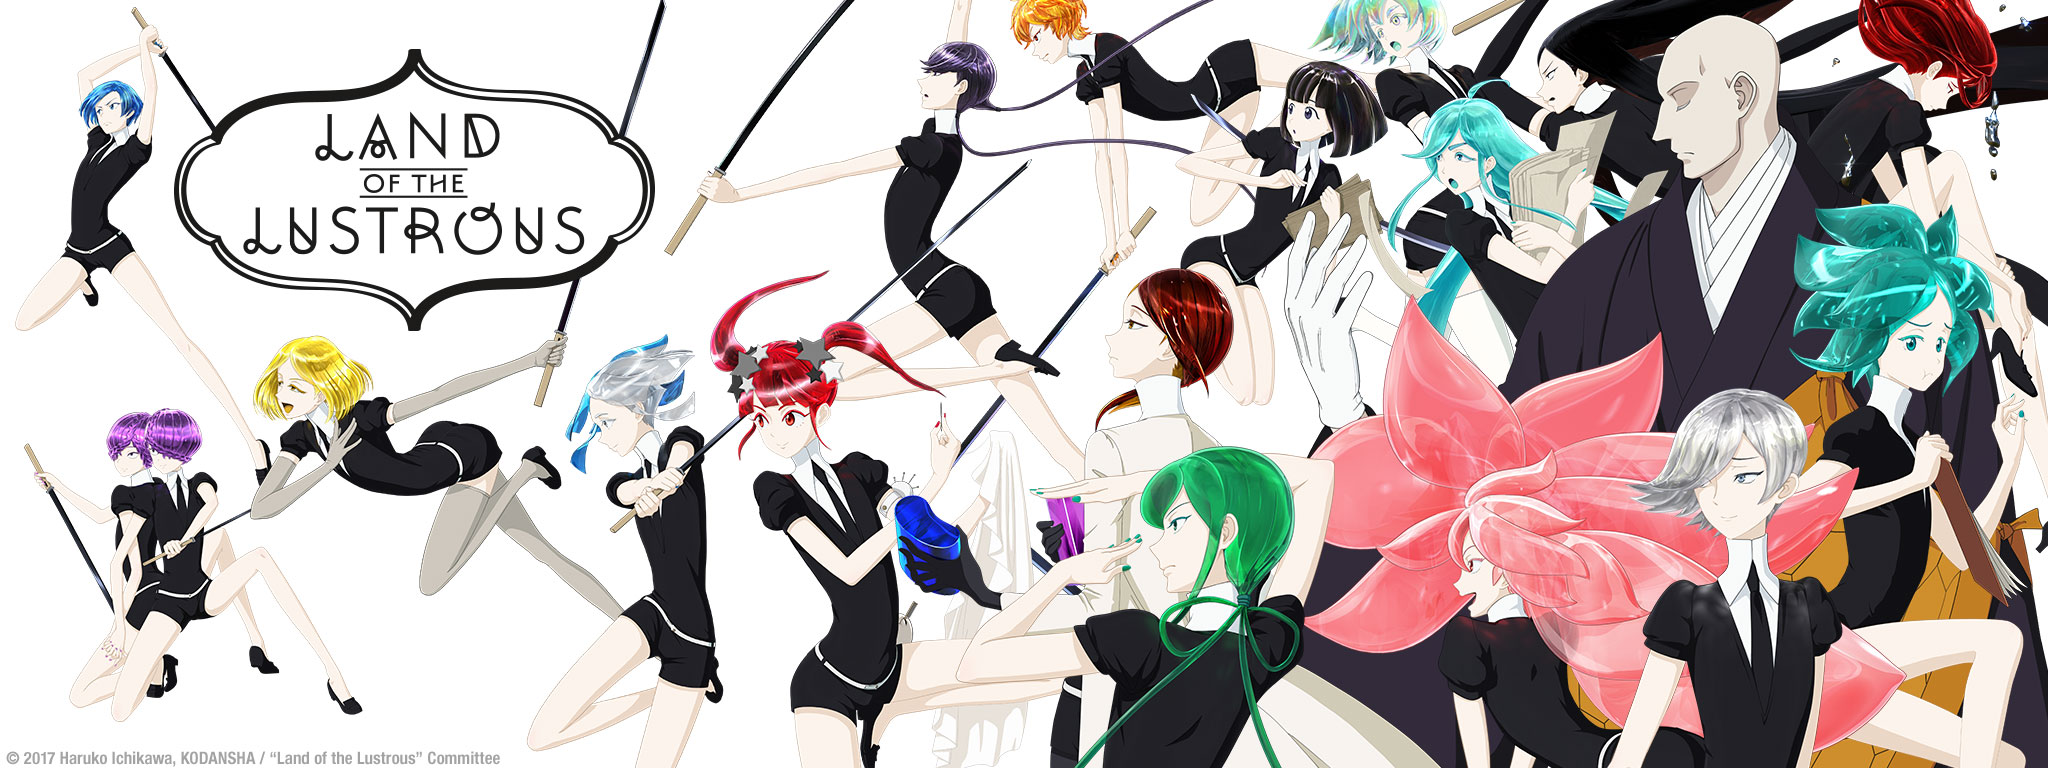 Title Art for Land of the Lustrous